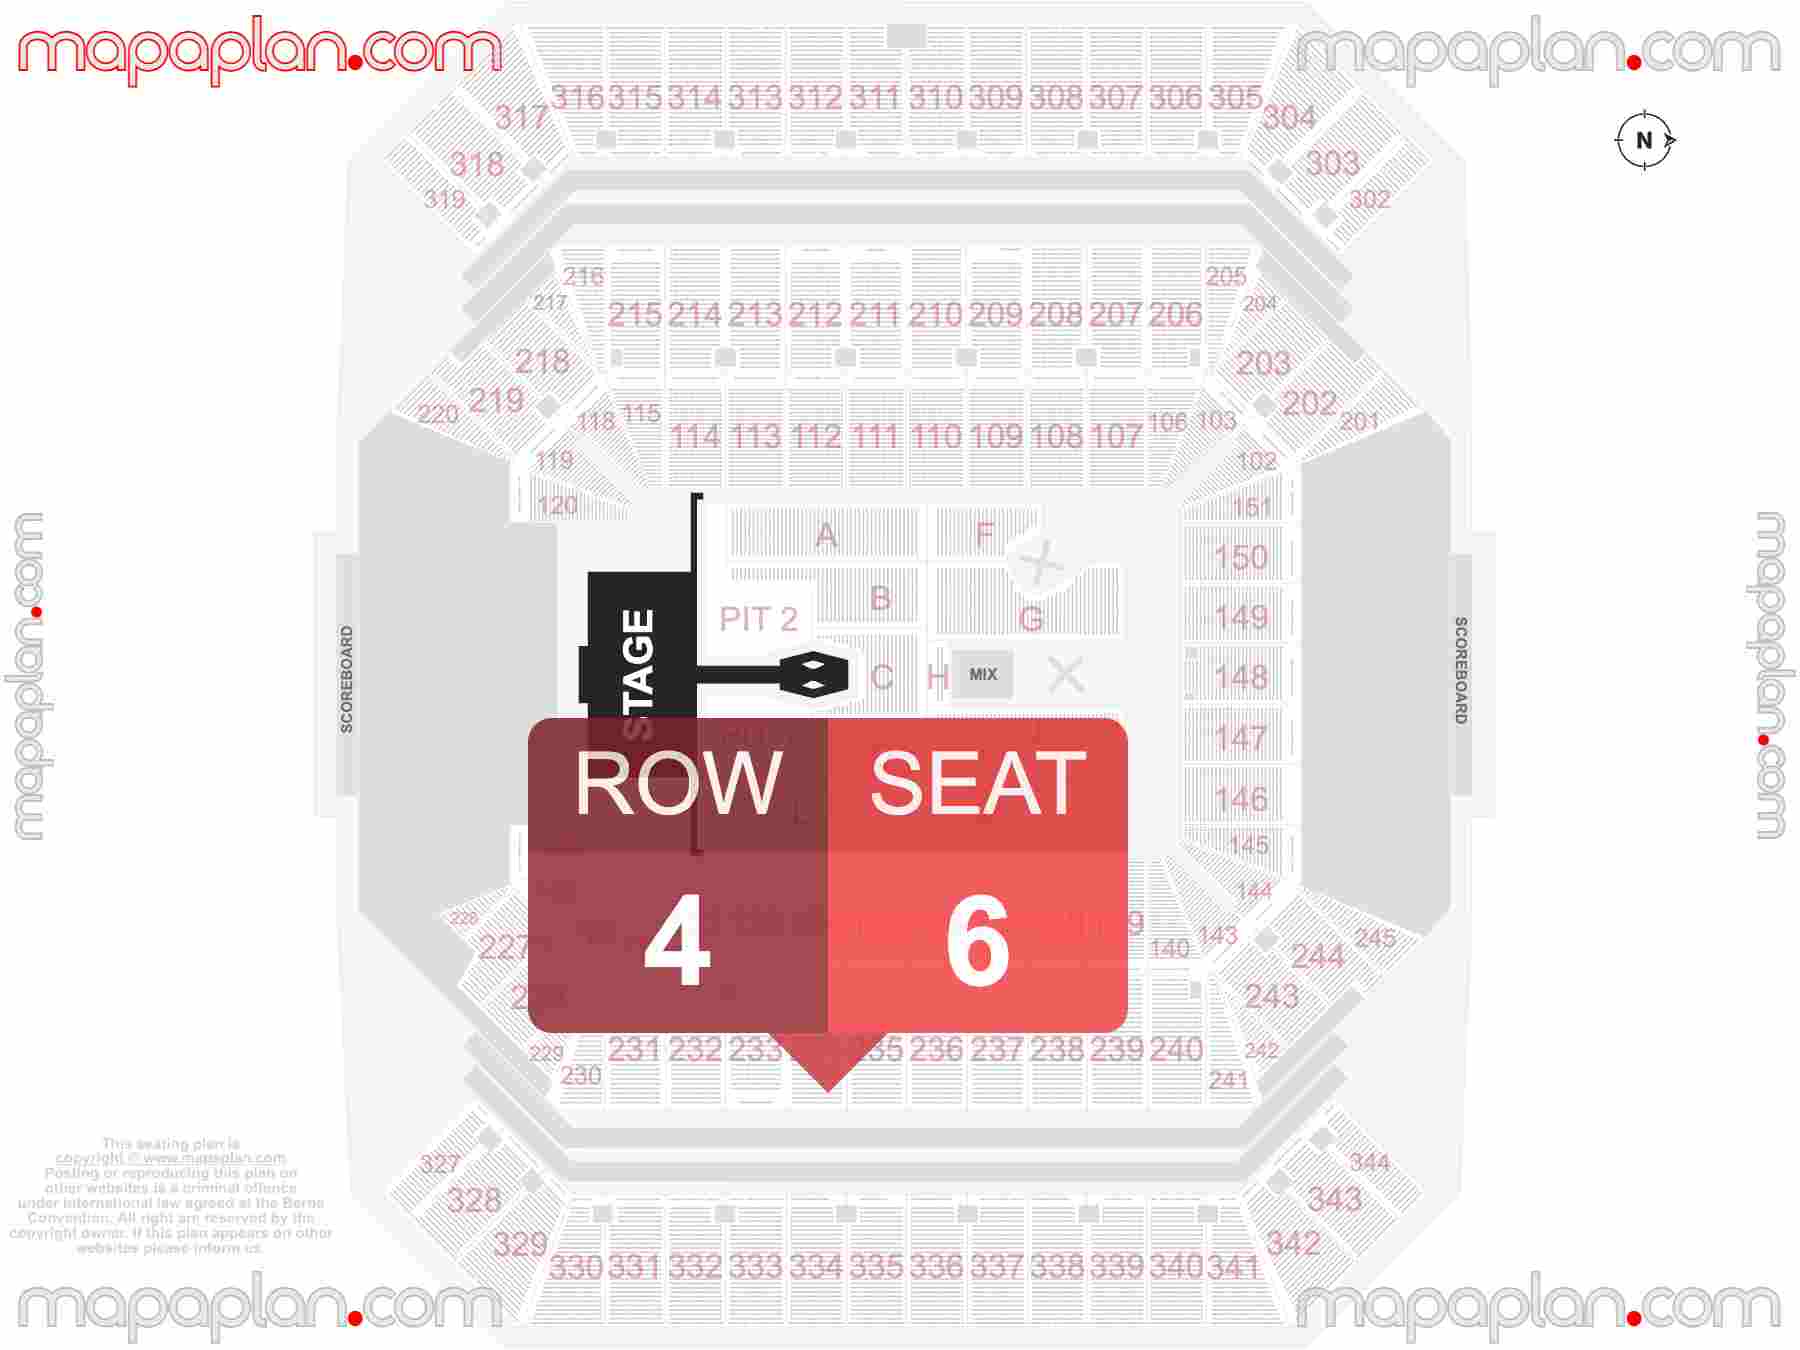 Tampa Raymond James Stadium seating chart Concert with extended catwalk runway B-stage and PIT standing room only seating chart with exact section numbers showing best rows and seats selection 3d layout - Best interactive seat finder tool with precise detailed location data